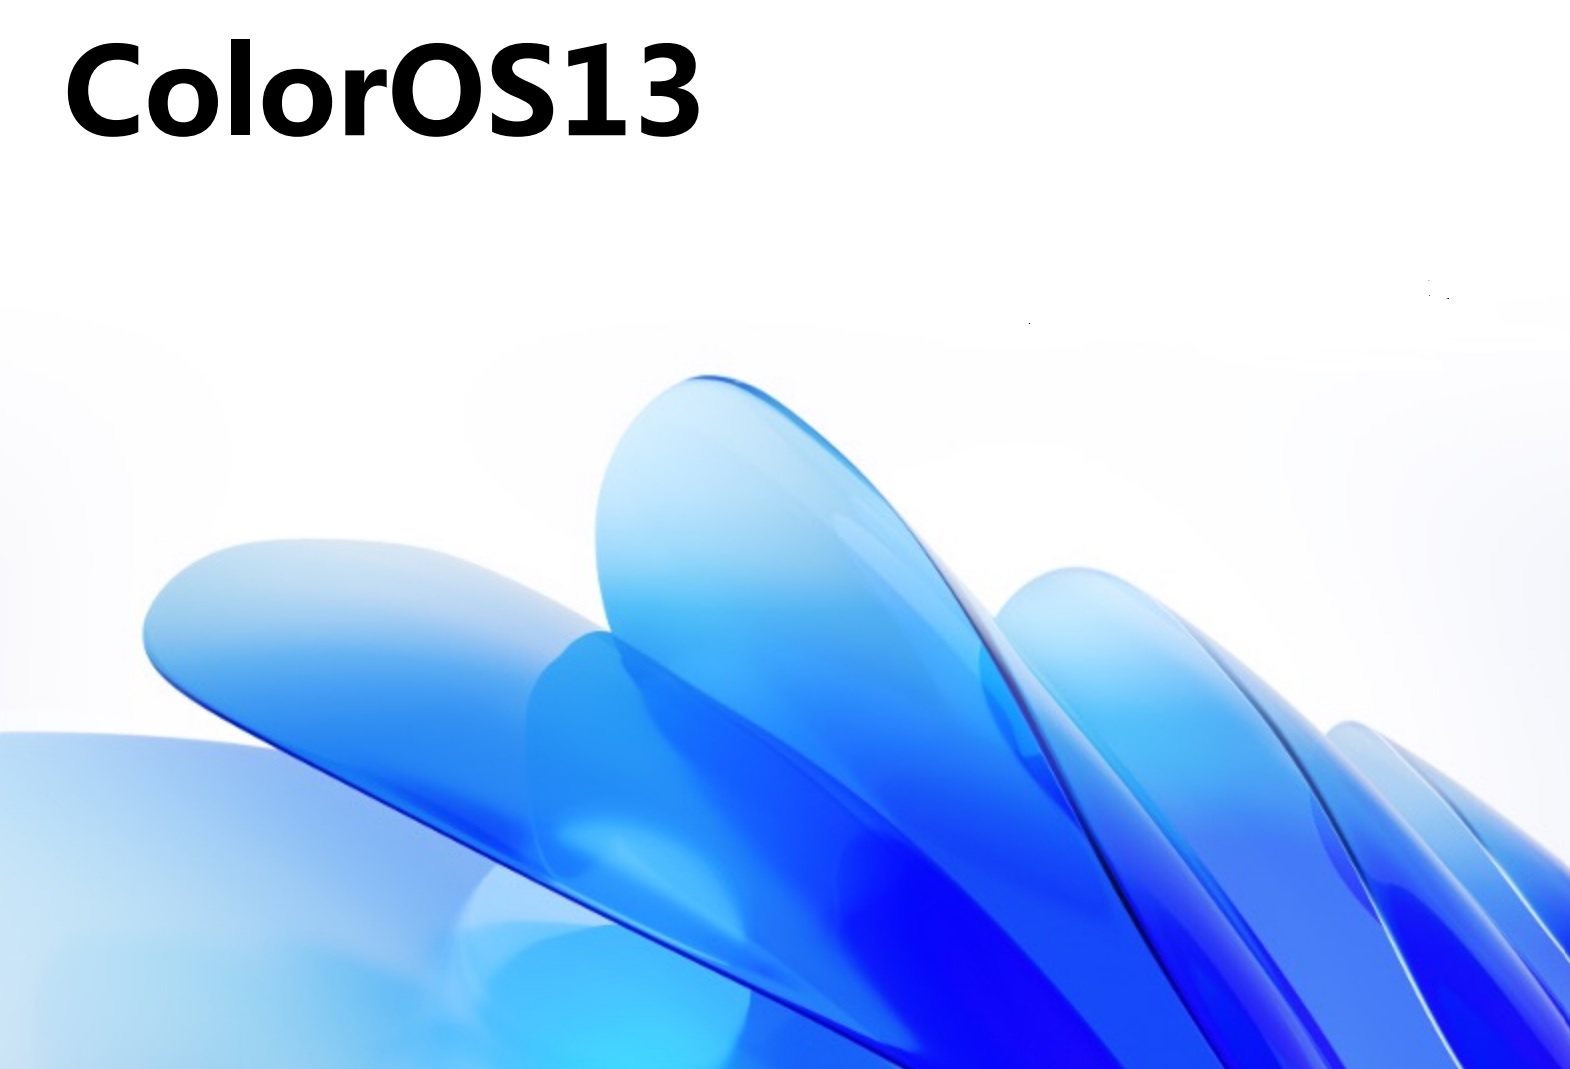 OPPO updates FindX5 Pro to Android 13/ColorOS13 (smartphone)